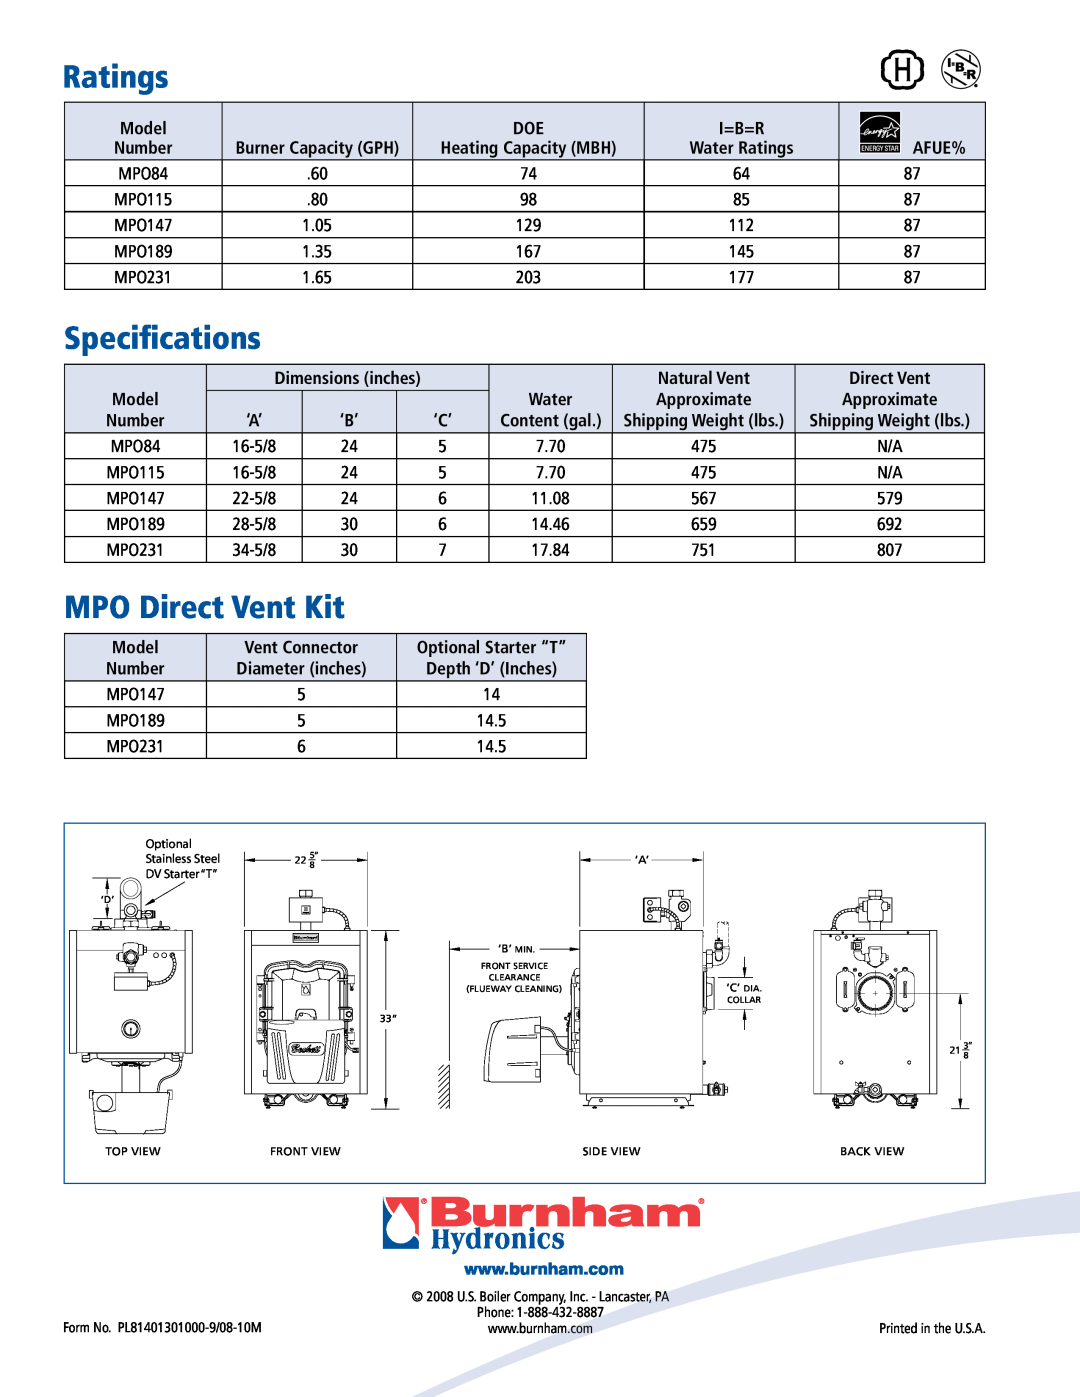 Burnham MPO Series manual Ratings, Specifications, MPO Direct Vent Kit, Afue%, Natural Vent, Model, Water, Approximate 